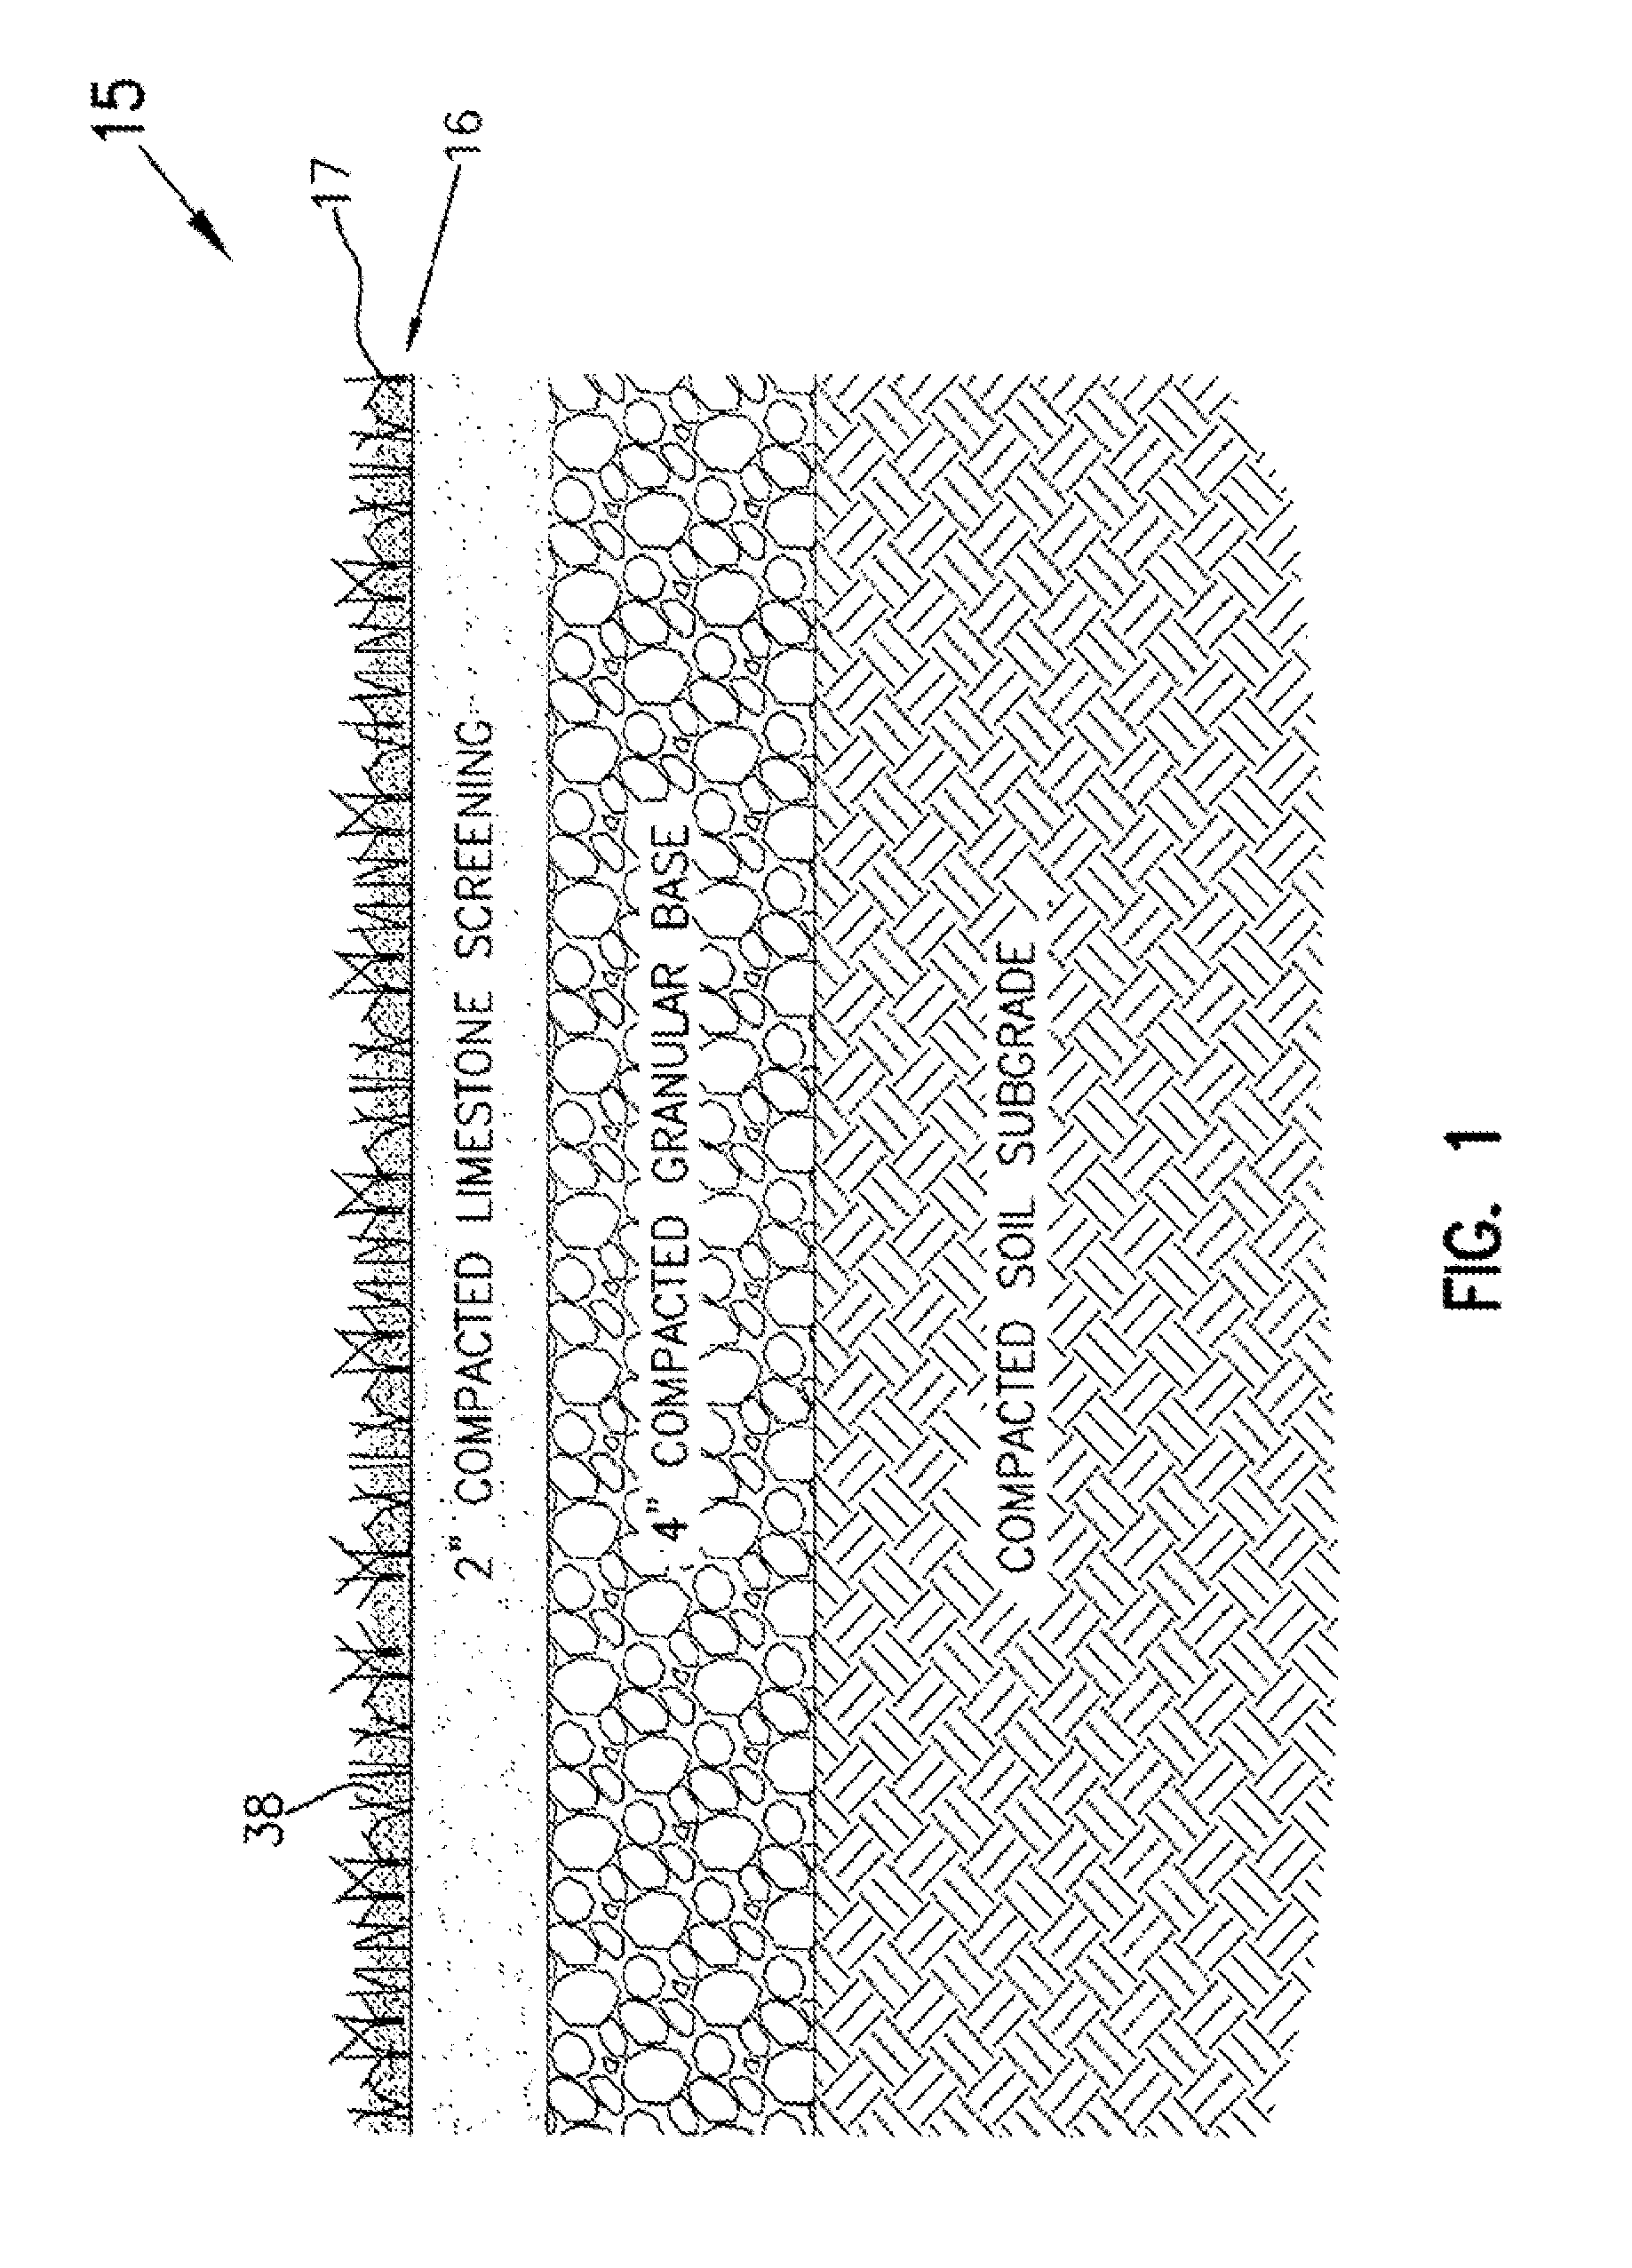 Method of Producing a Woven Artificial Turf